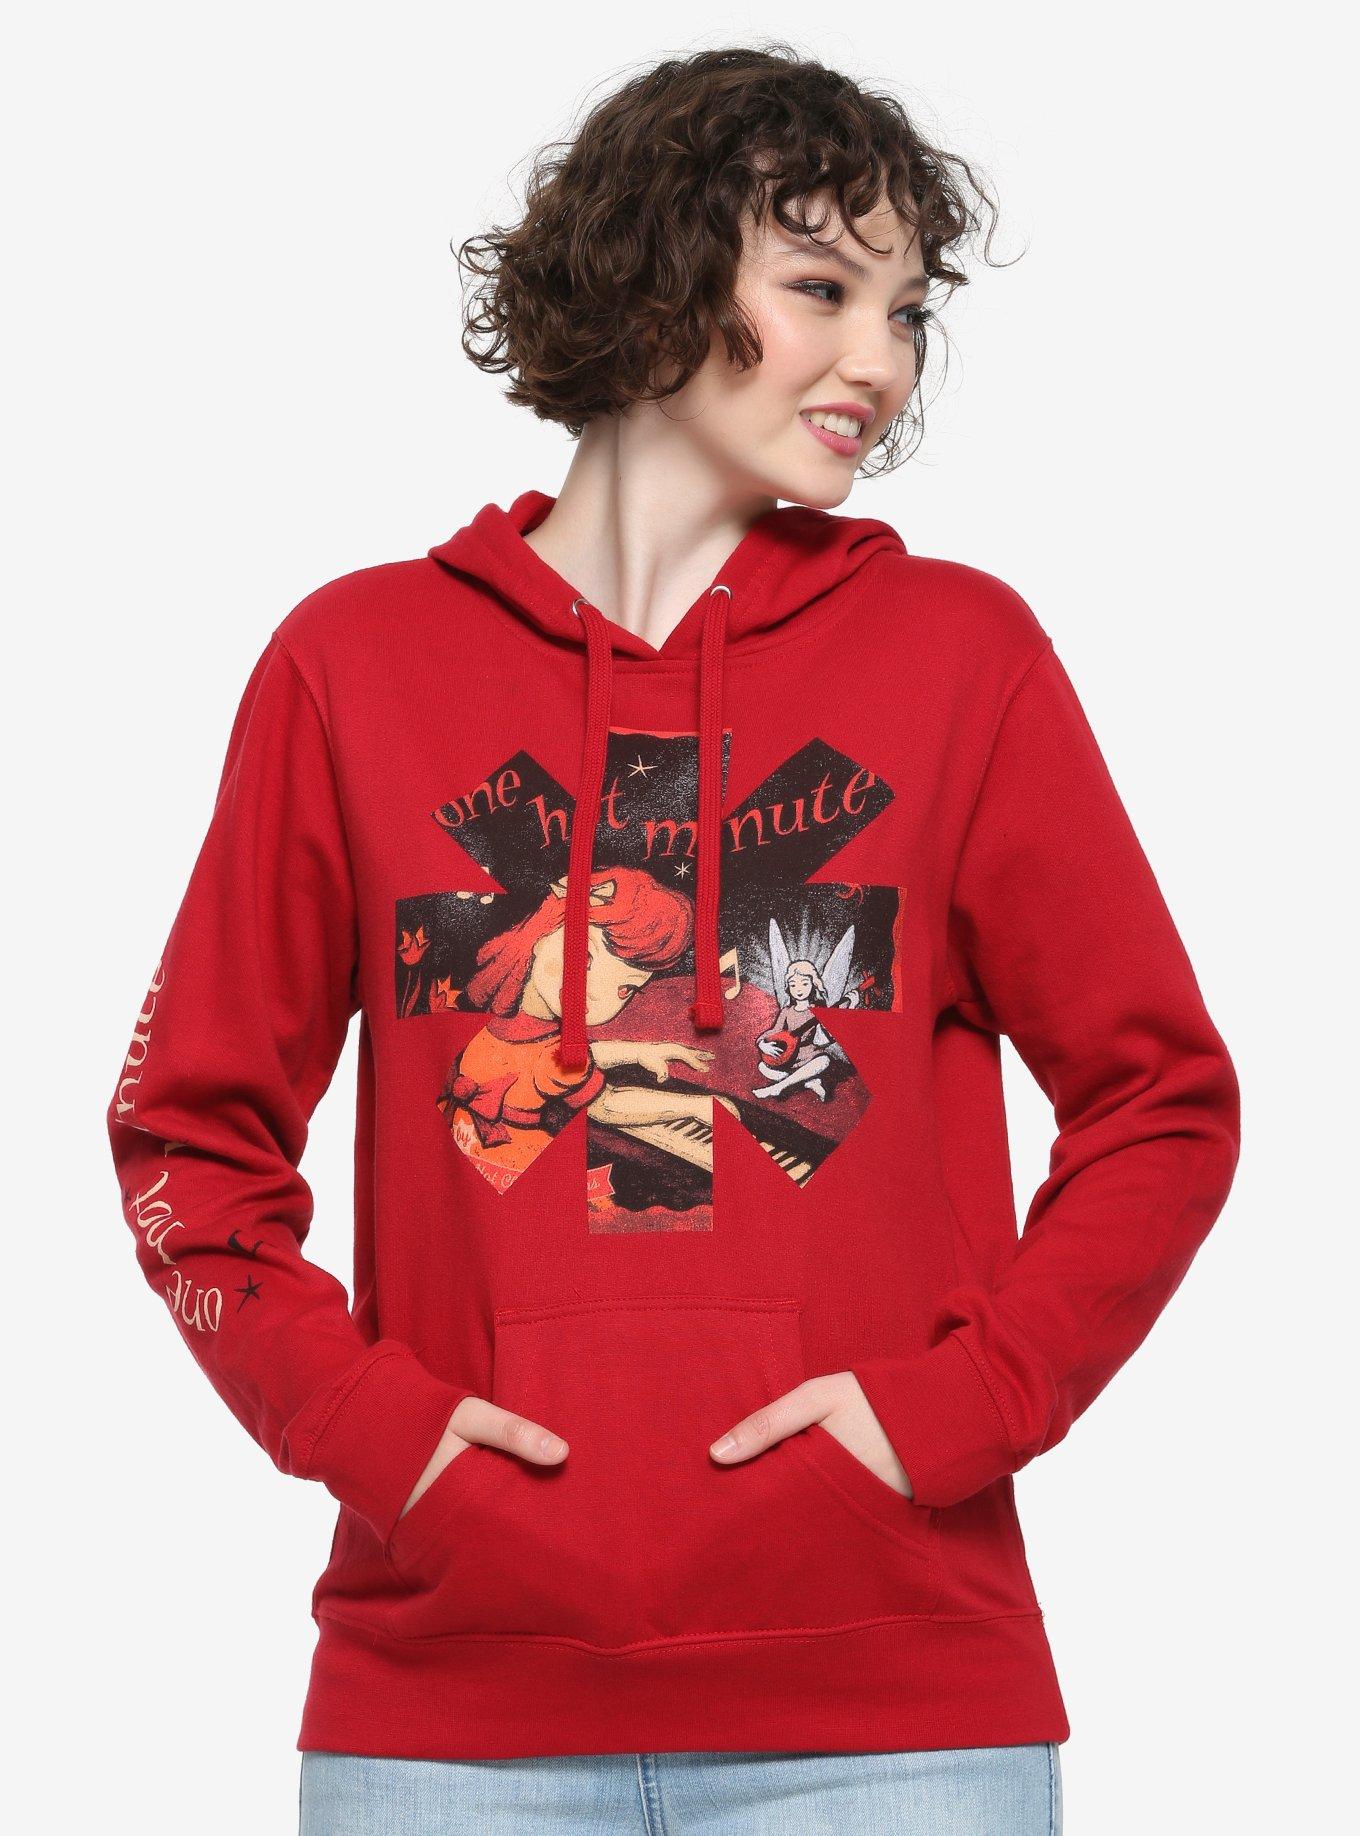 Red Hot Chili Peppers One Hot Minute Girls Hoodie, RED, hi-res